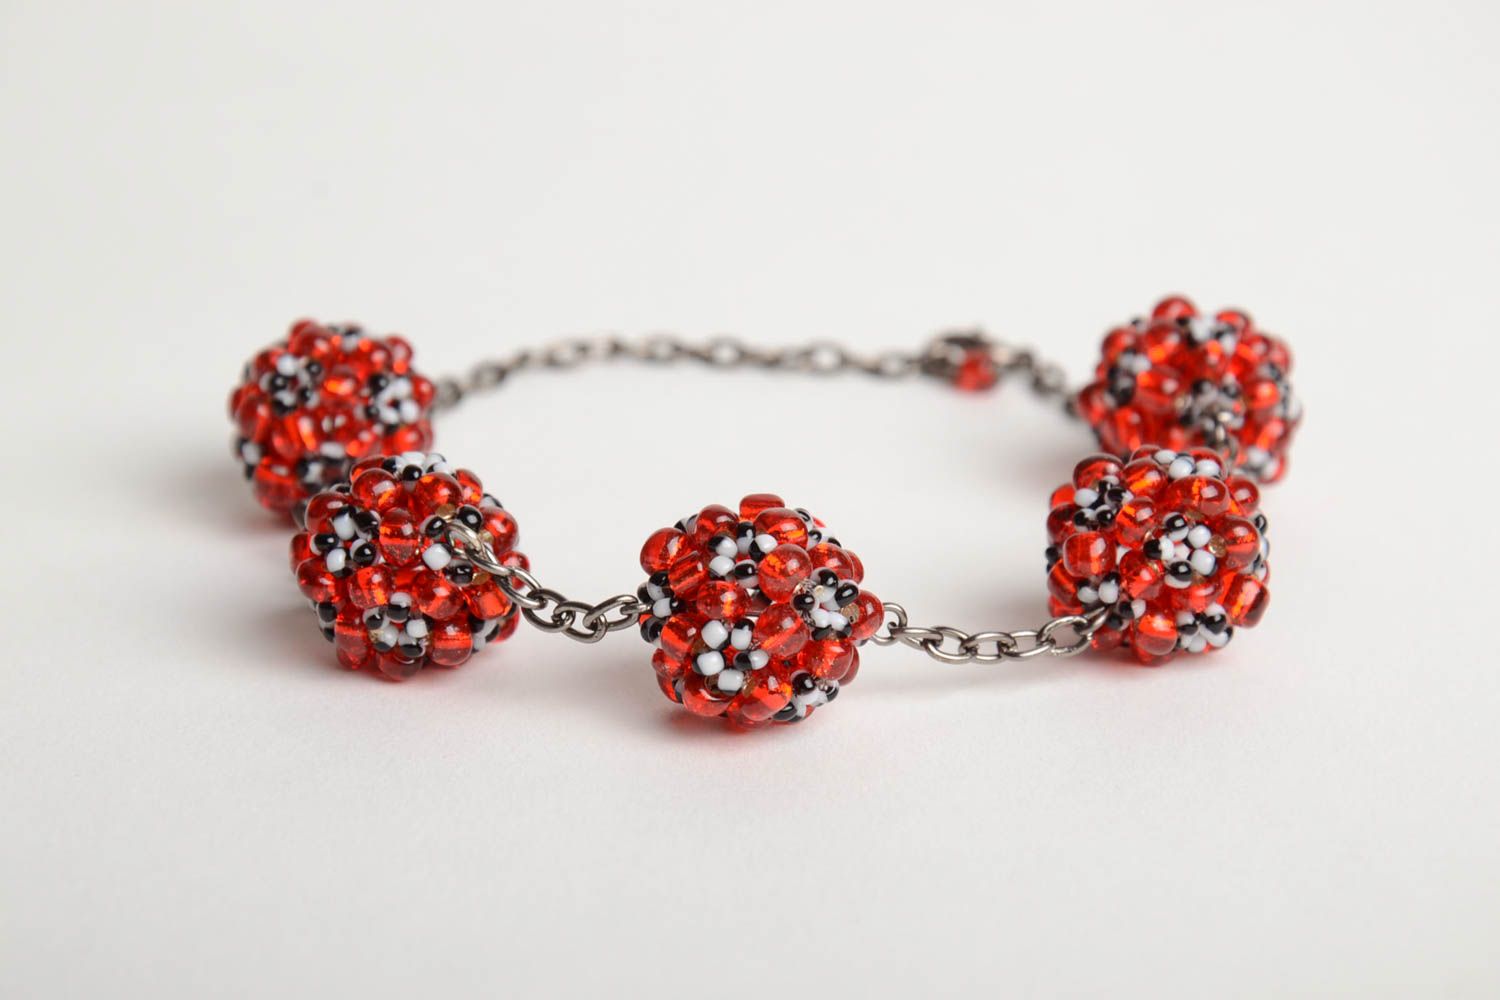 Handmade metal chain women's wrist bracelet with red and white bead woven balls photo 3